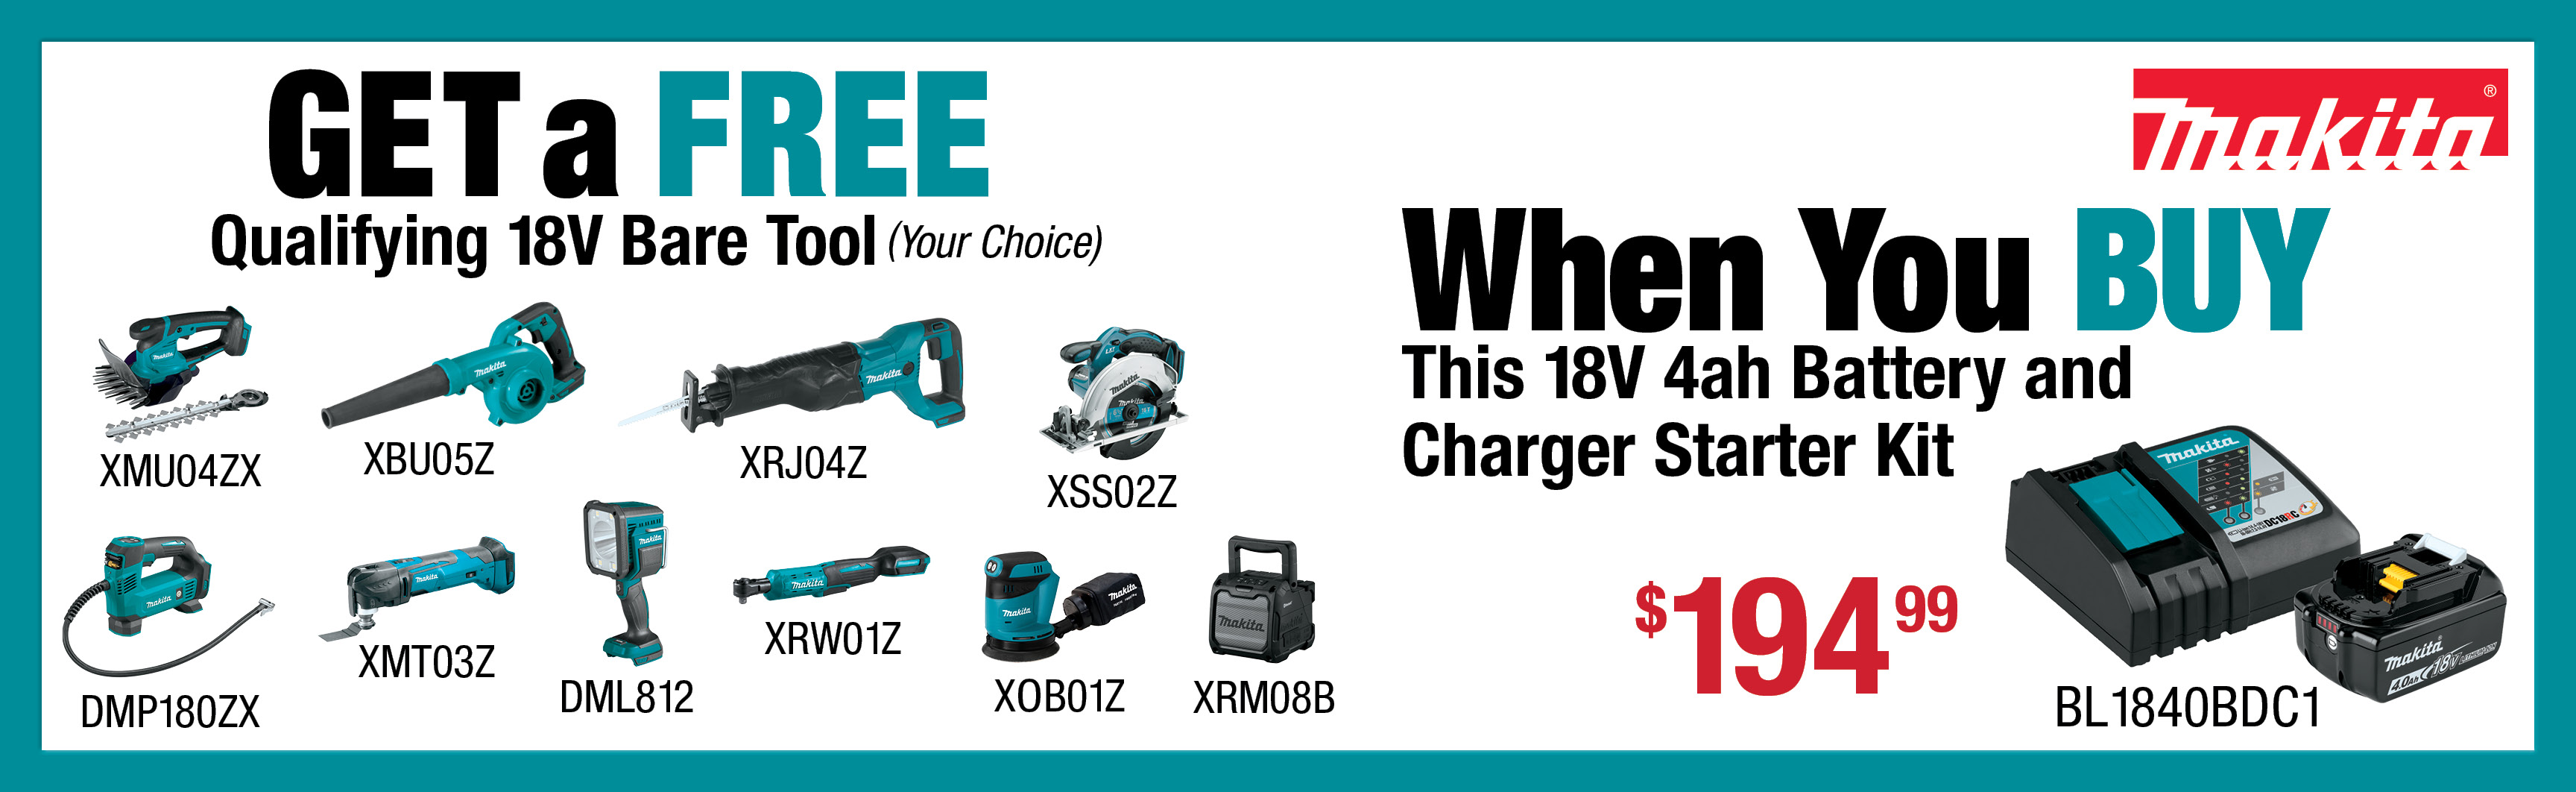 Makita May - July: Buy a BL1840BDC1 LXT Starter Kit and get a FREE qualifying LXT Bare Tool